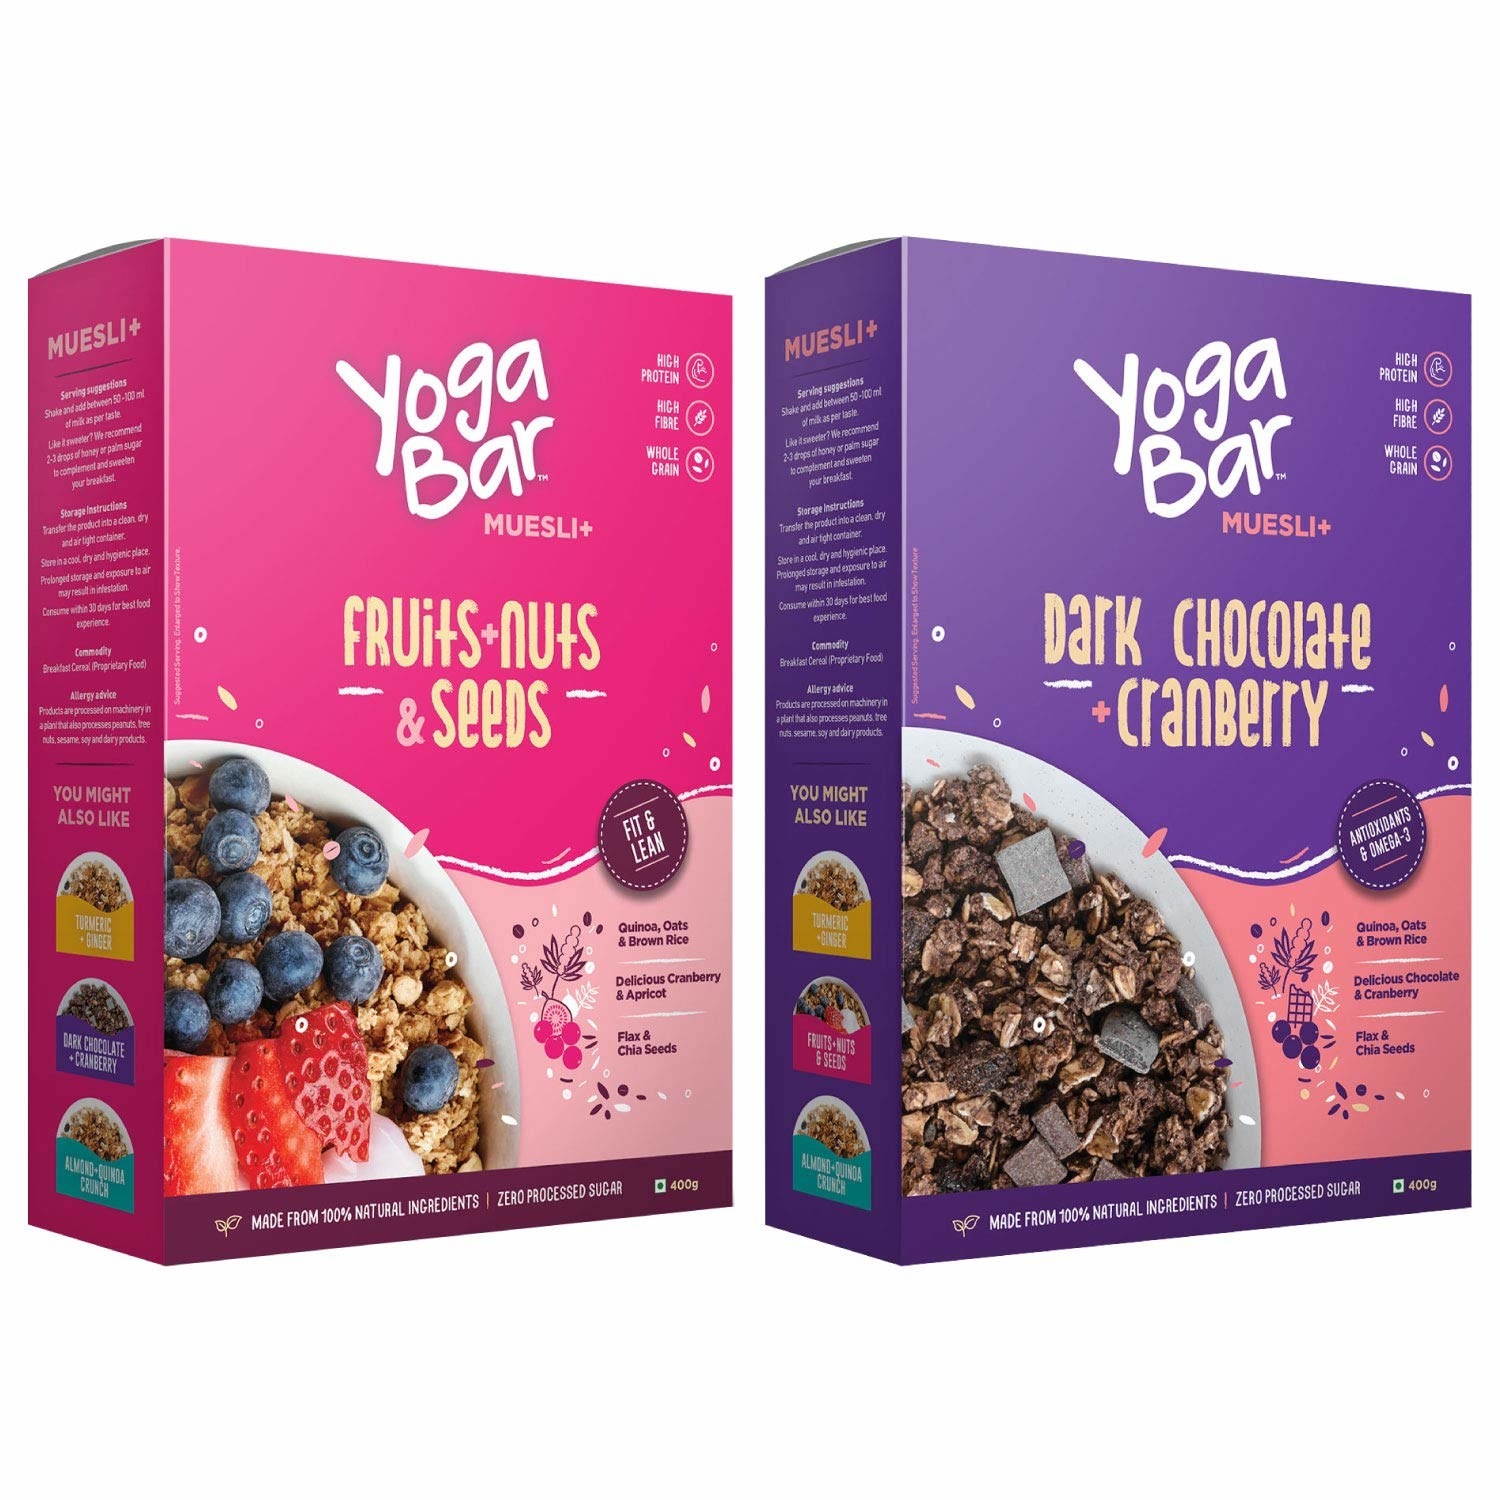 Packaging of the two muesli flavours